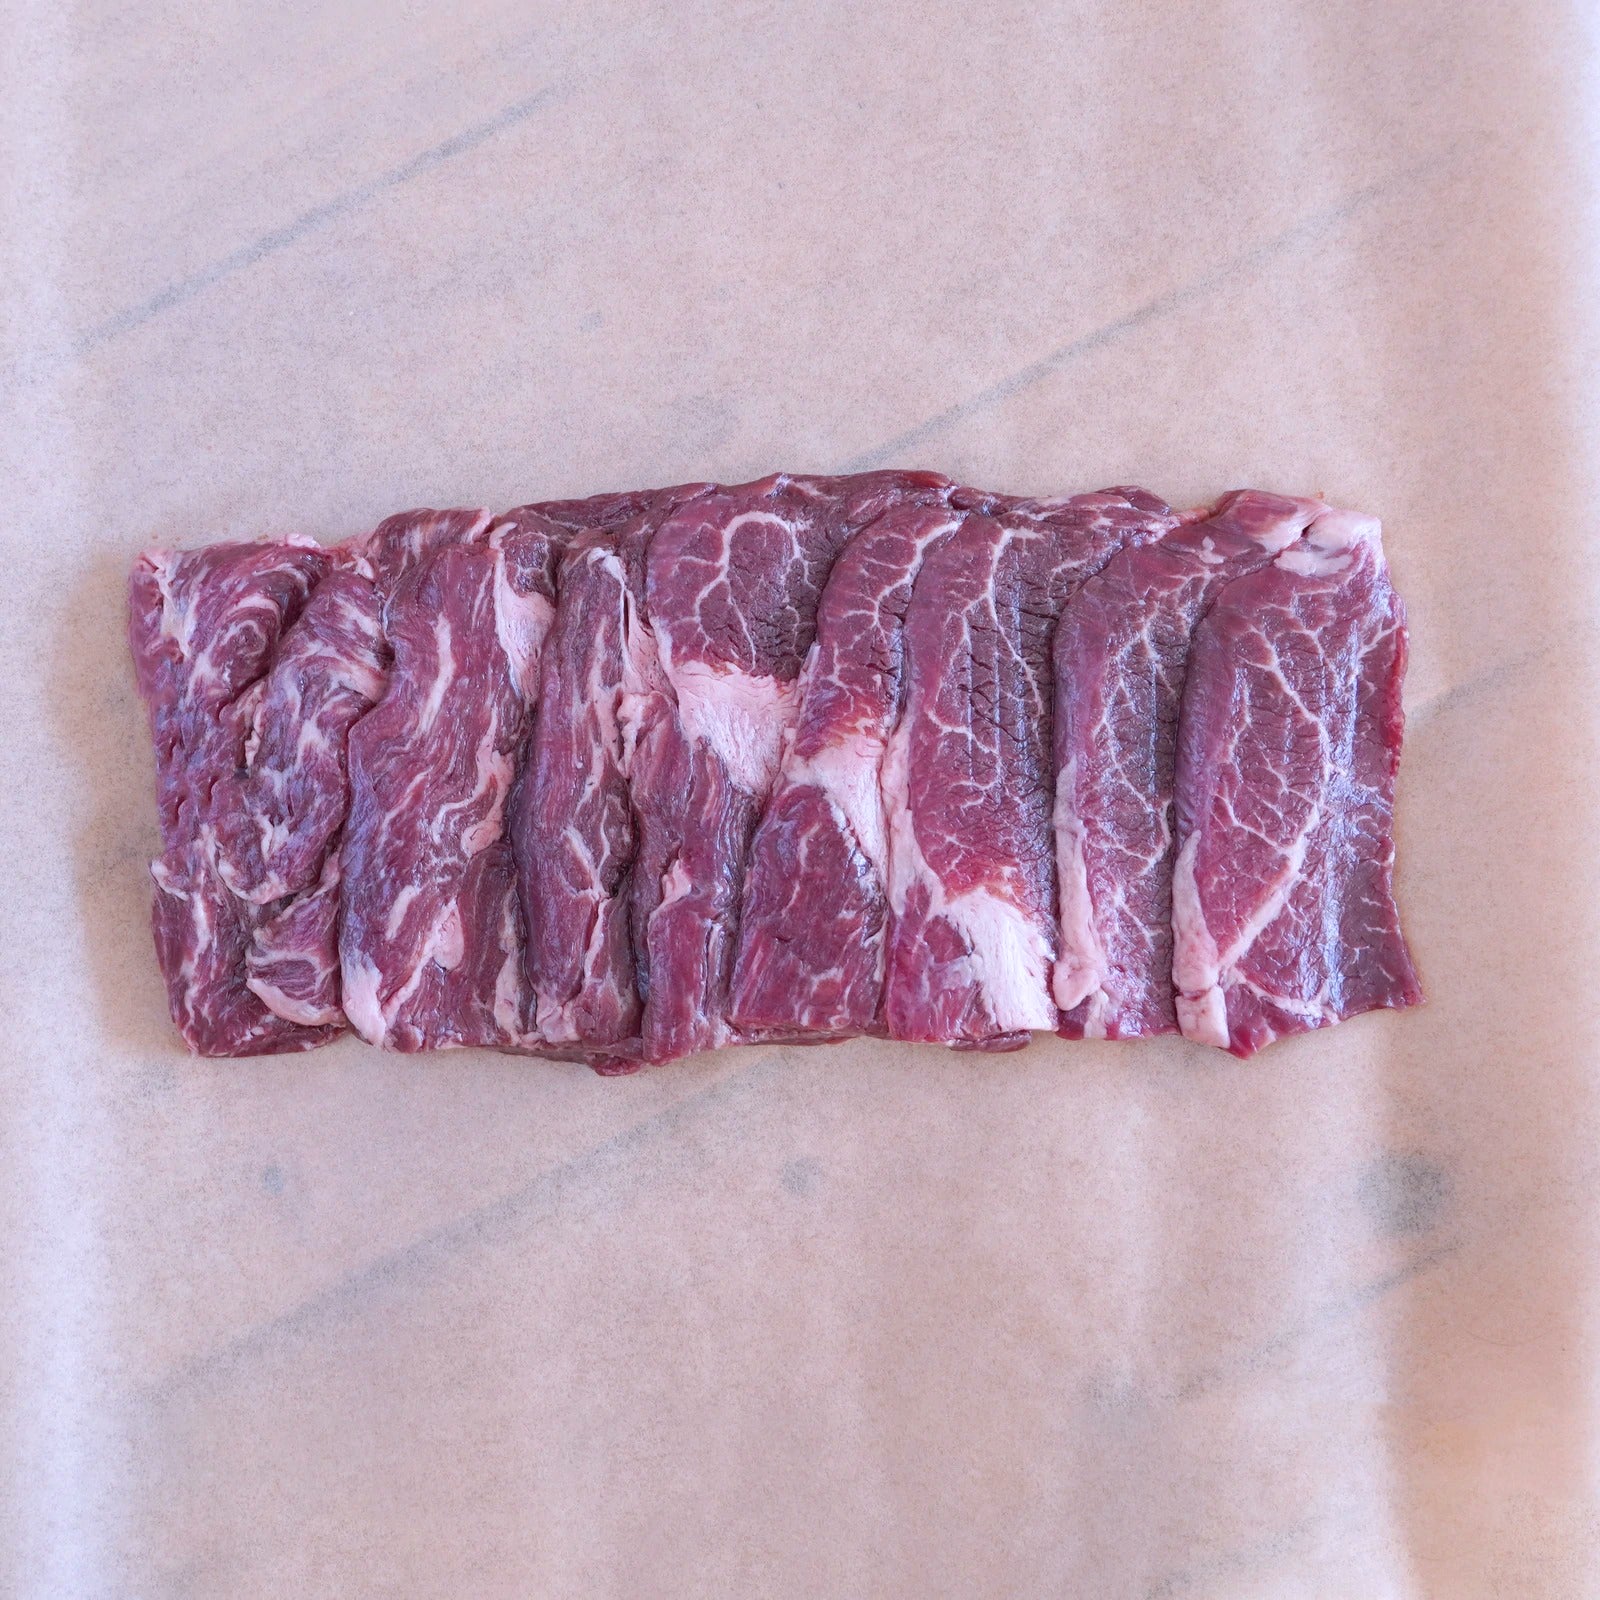 Grass-Fed Beef Hanging Tender Slices from Australia (300g) - Horizon Farms